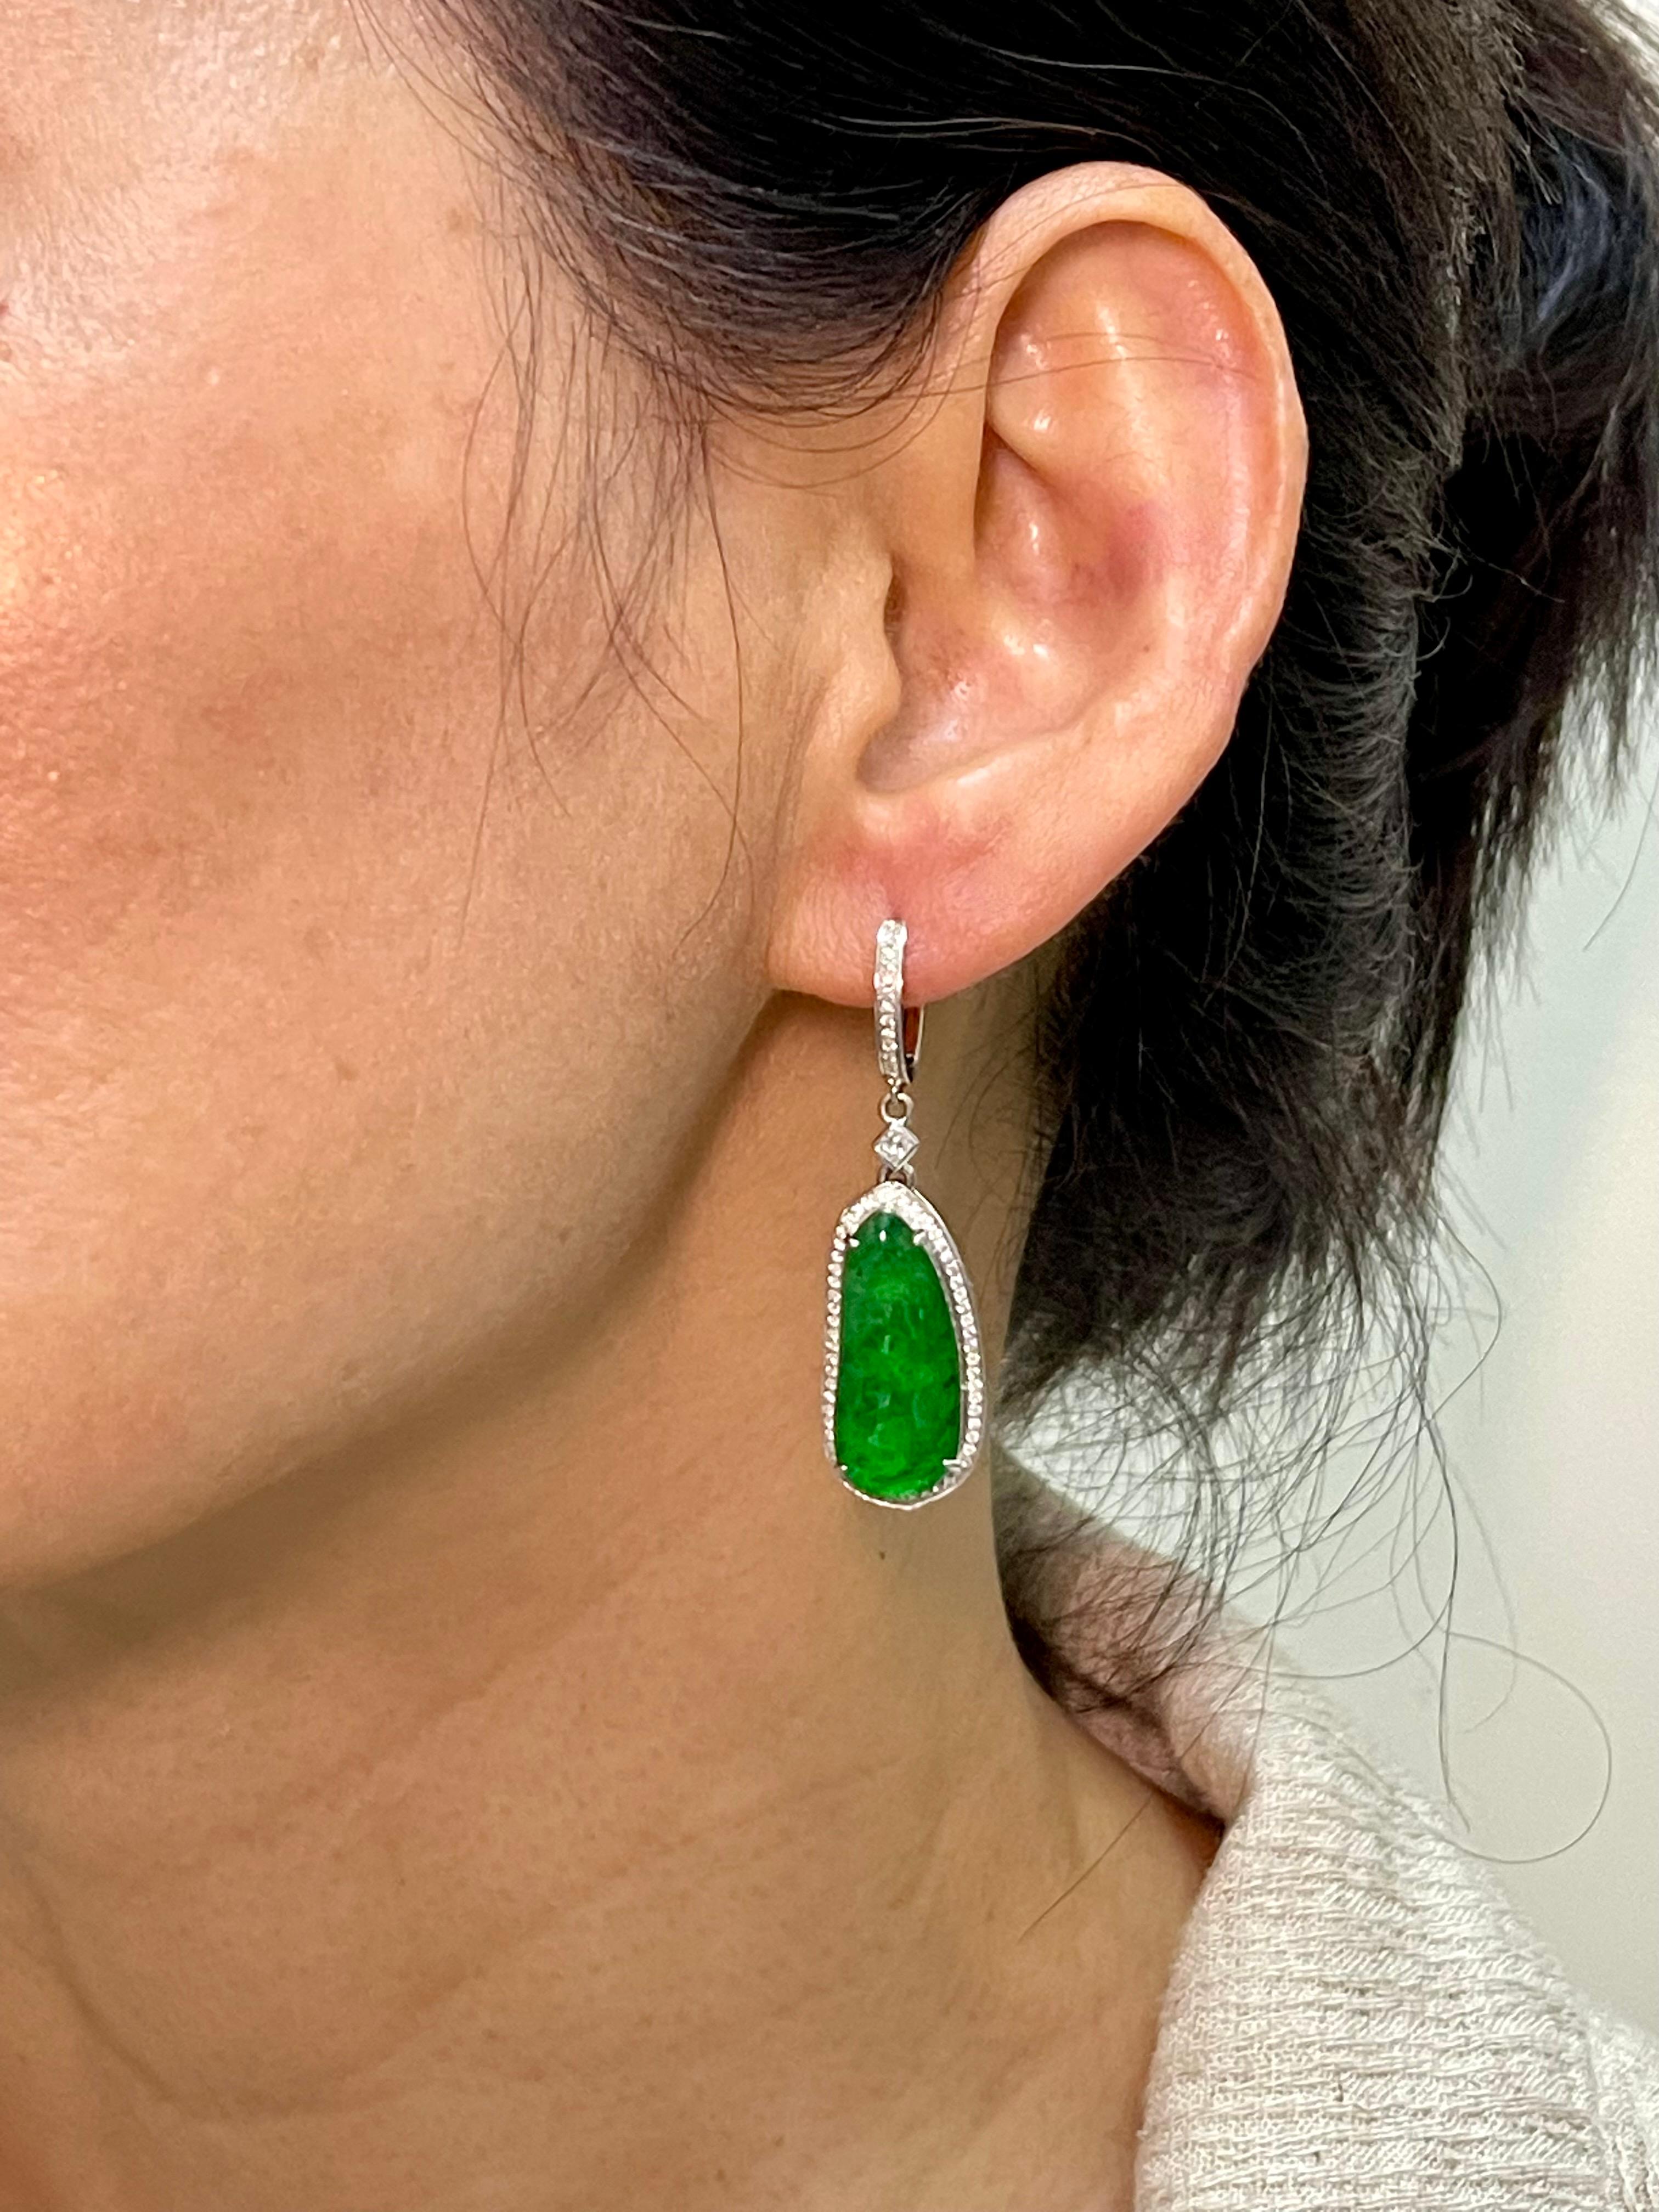 These icy jade apple green earrings are certified by 2 labs. Here is a nice pair of apple green Jadeite Jade earrings. The earrings are set in 18k white gold, and white diamonds. The 2 jade peapods glows. The icy jade peapod carving represents